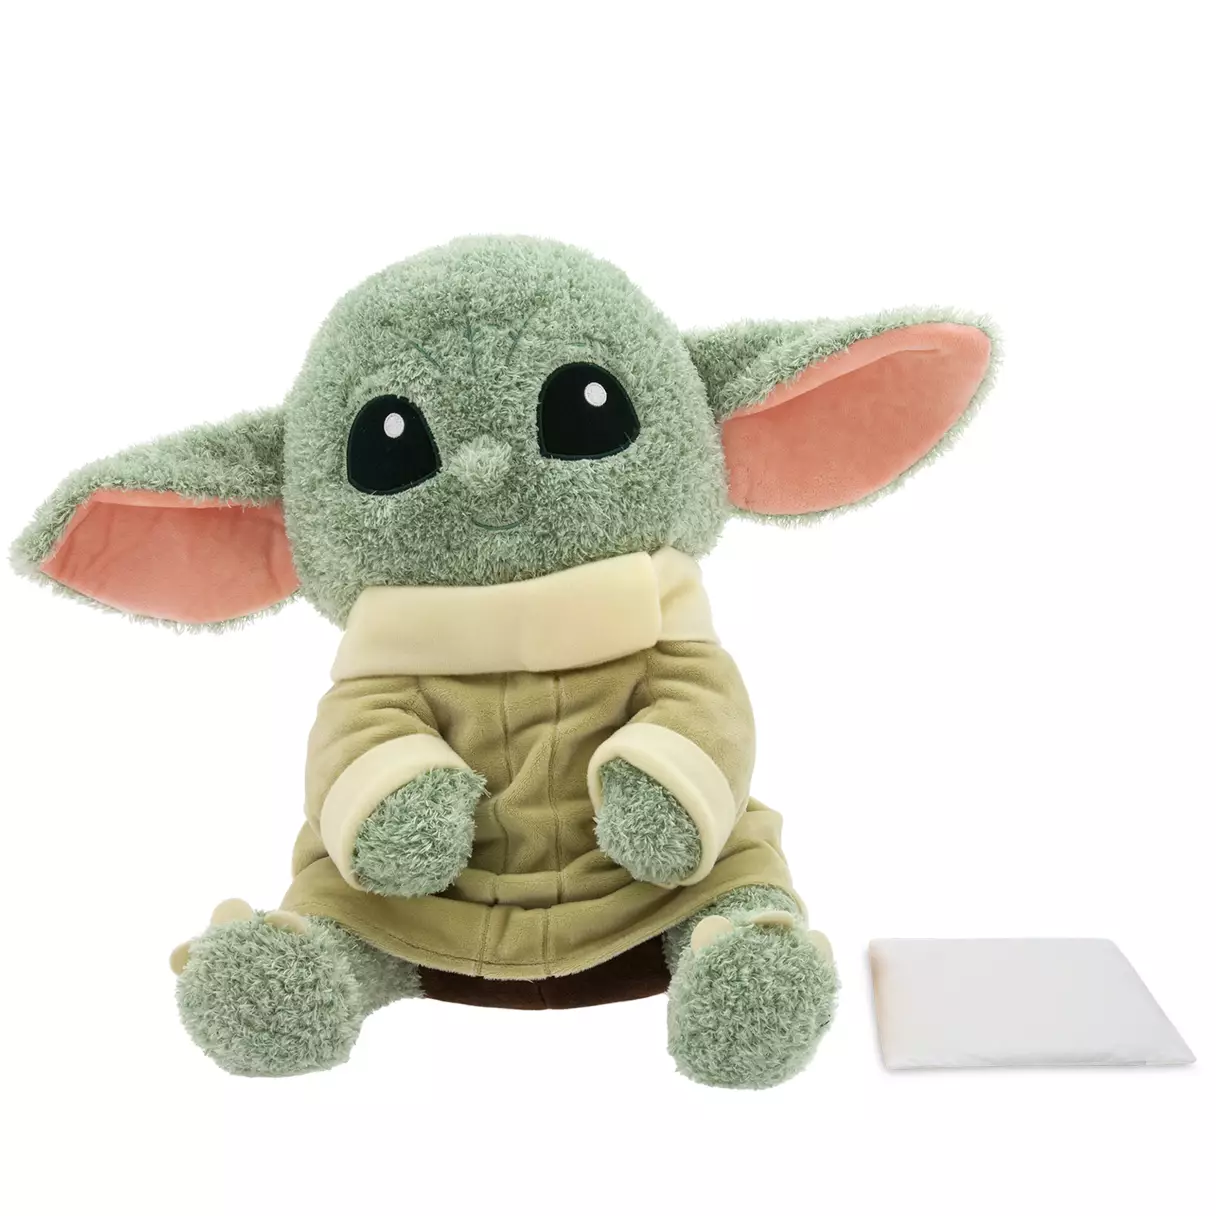 TM The Child (Grogu) Weighted Plush Toy 1